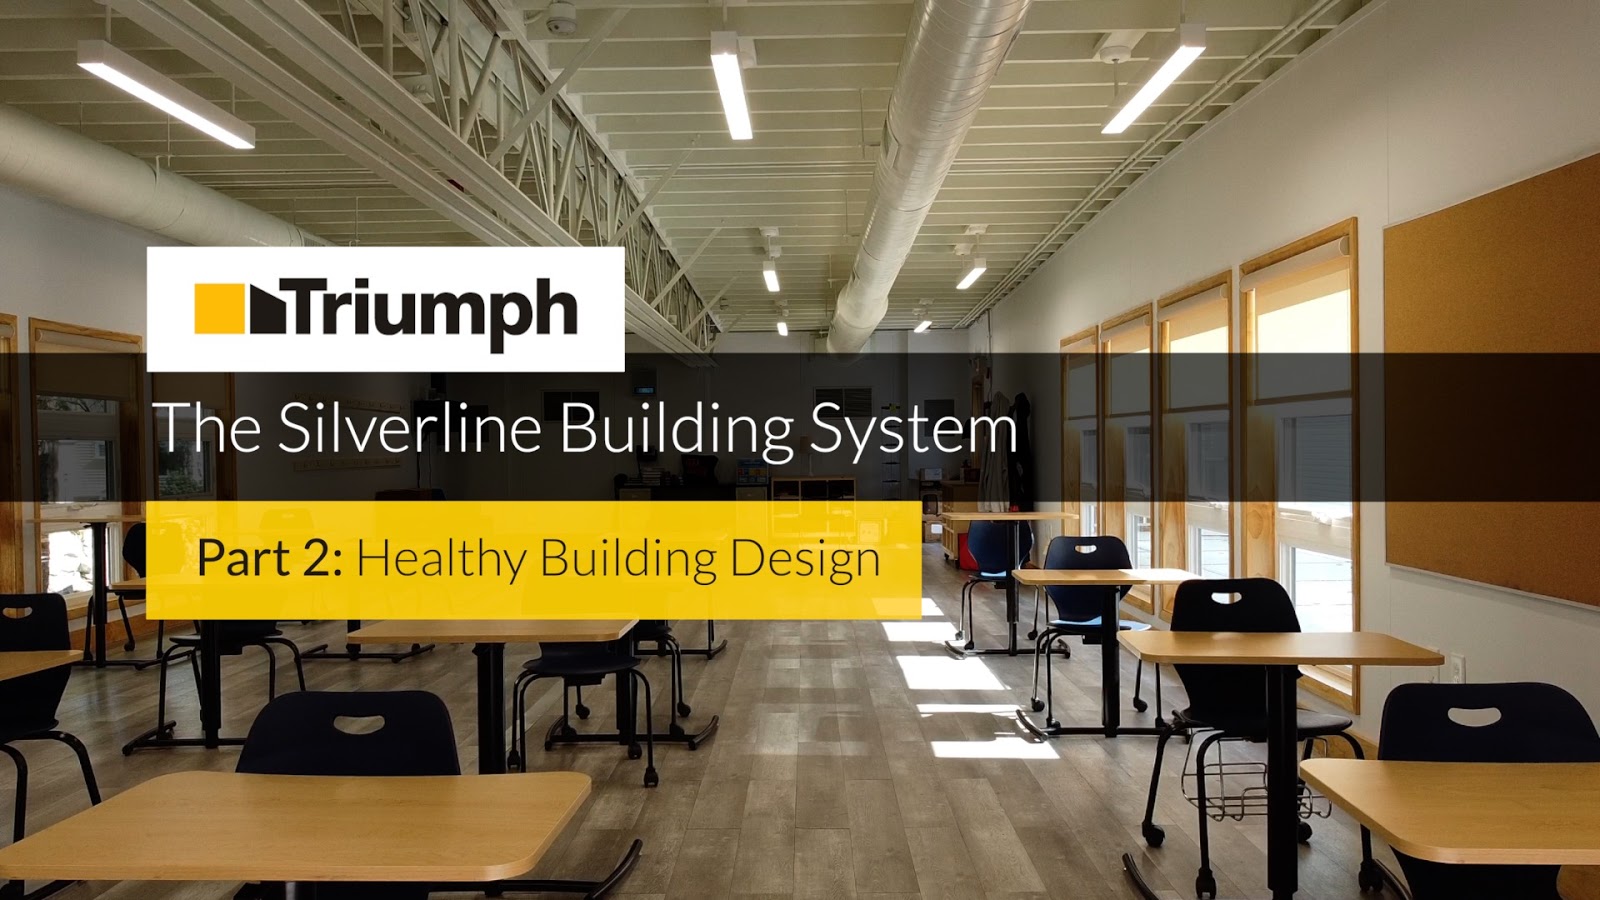 featured image for silverline building system